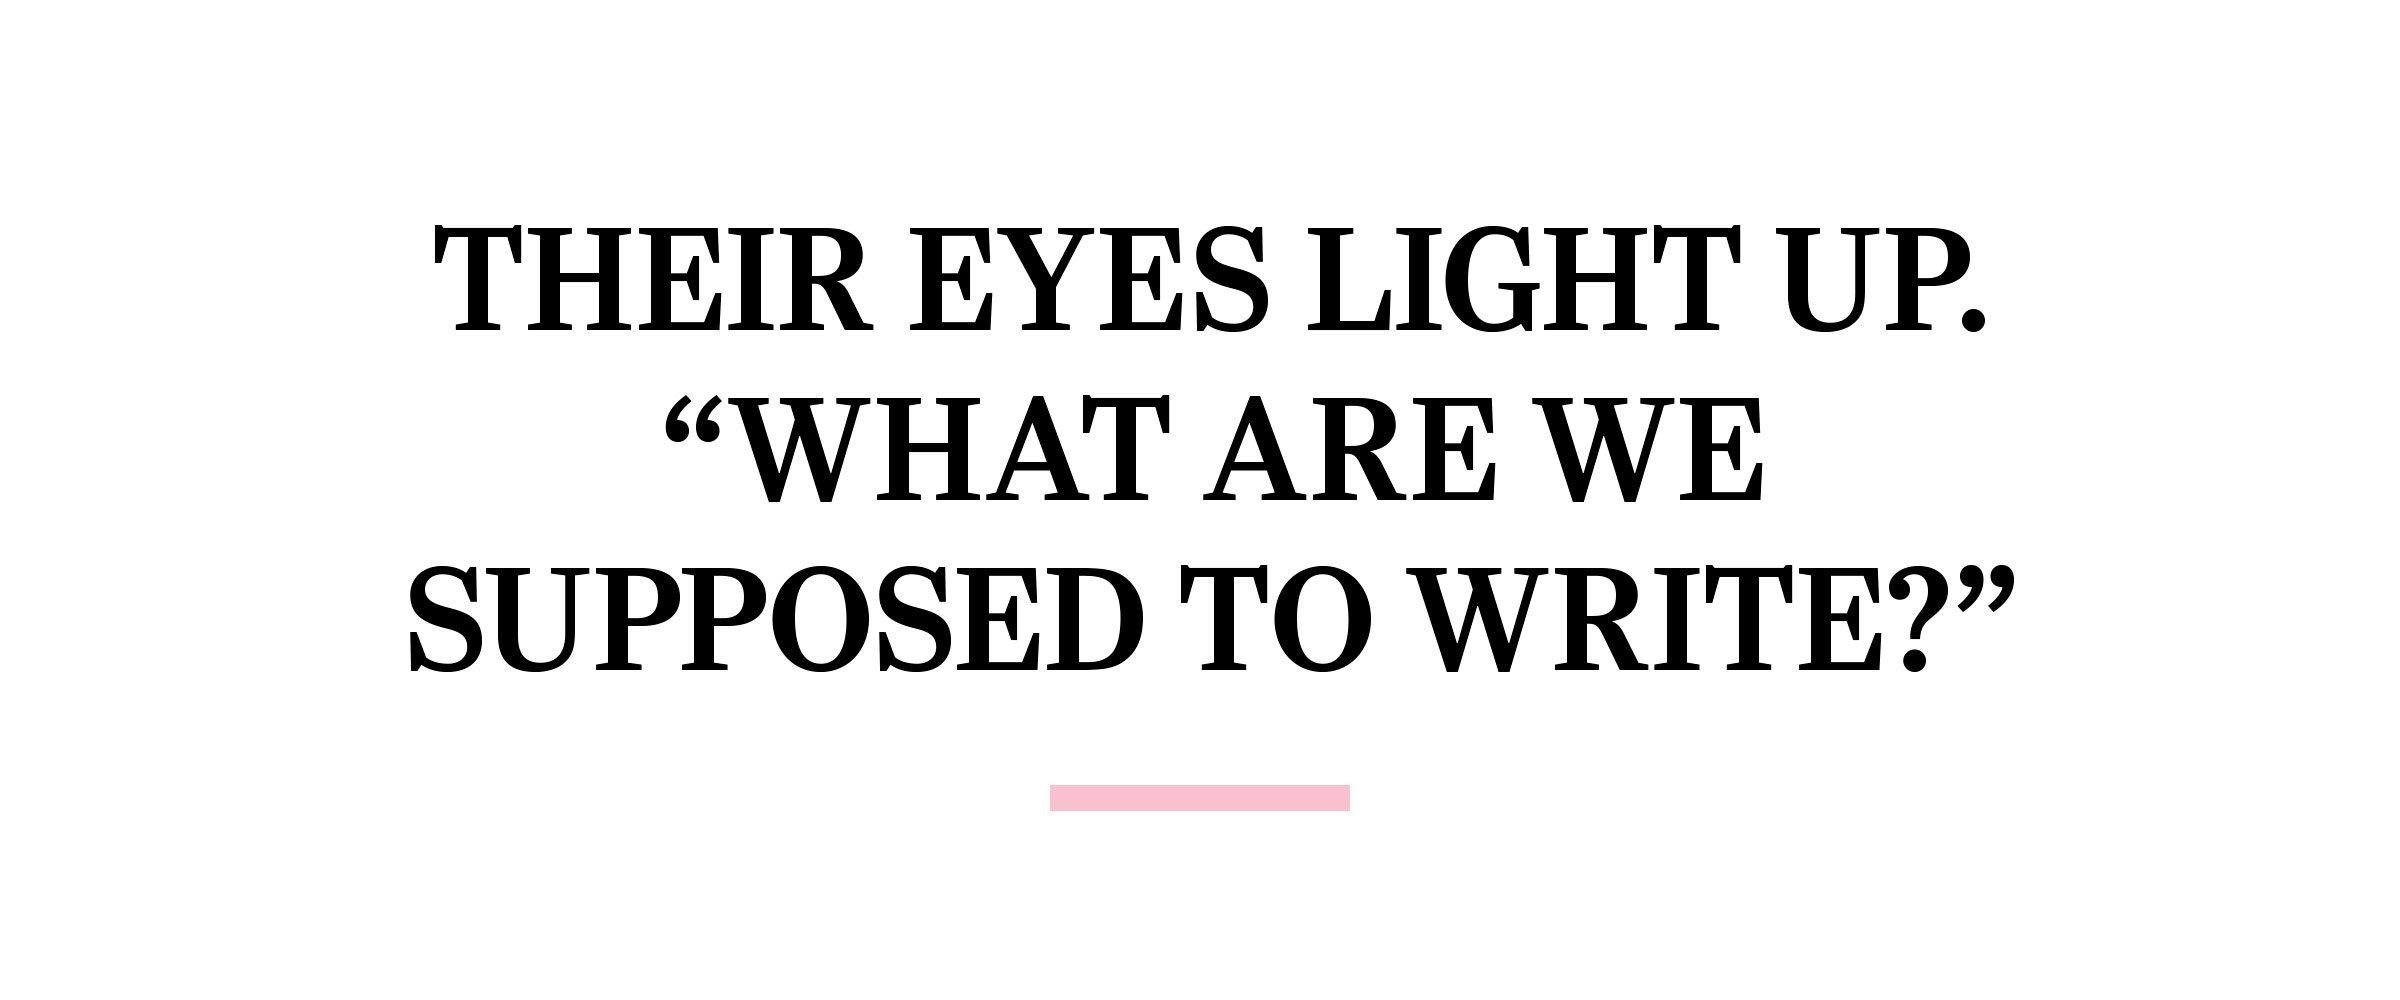 text: Their eyes light up. “What are we supposed to write?”